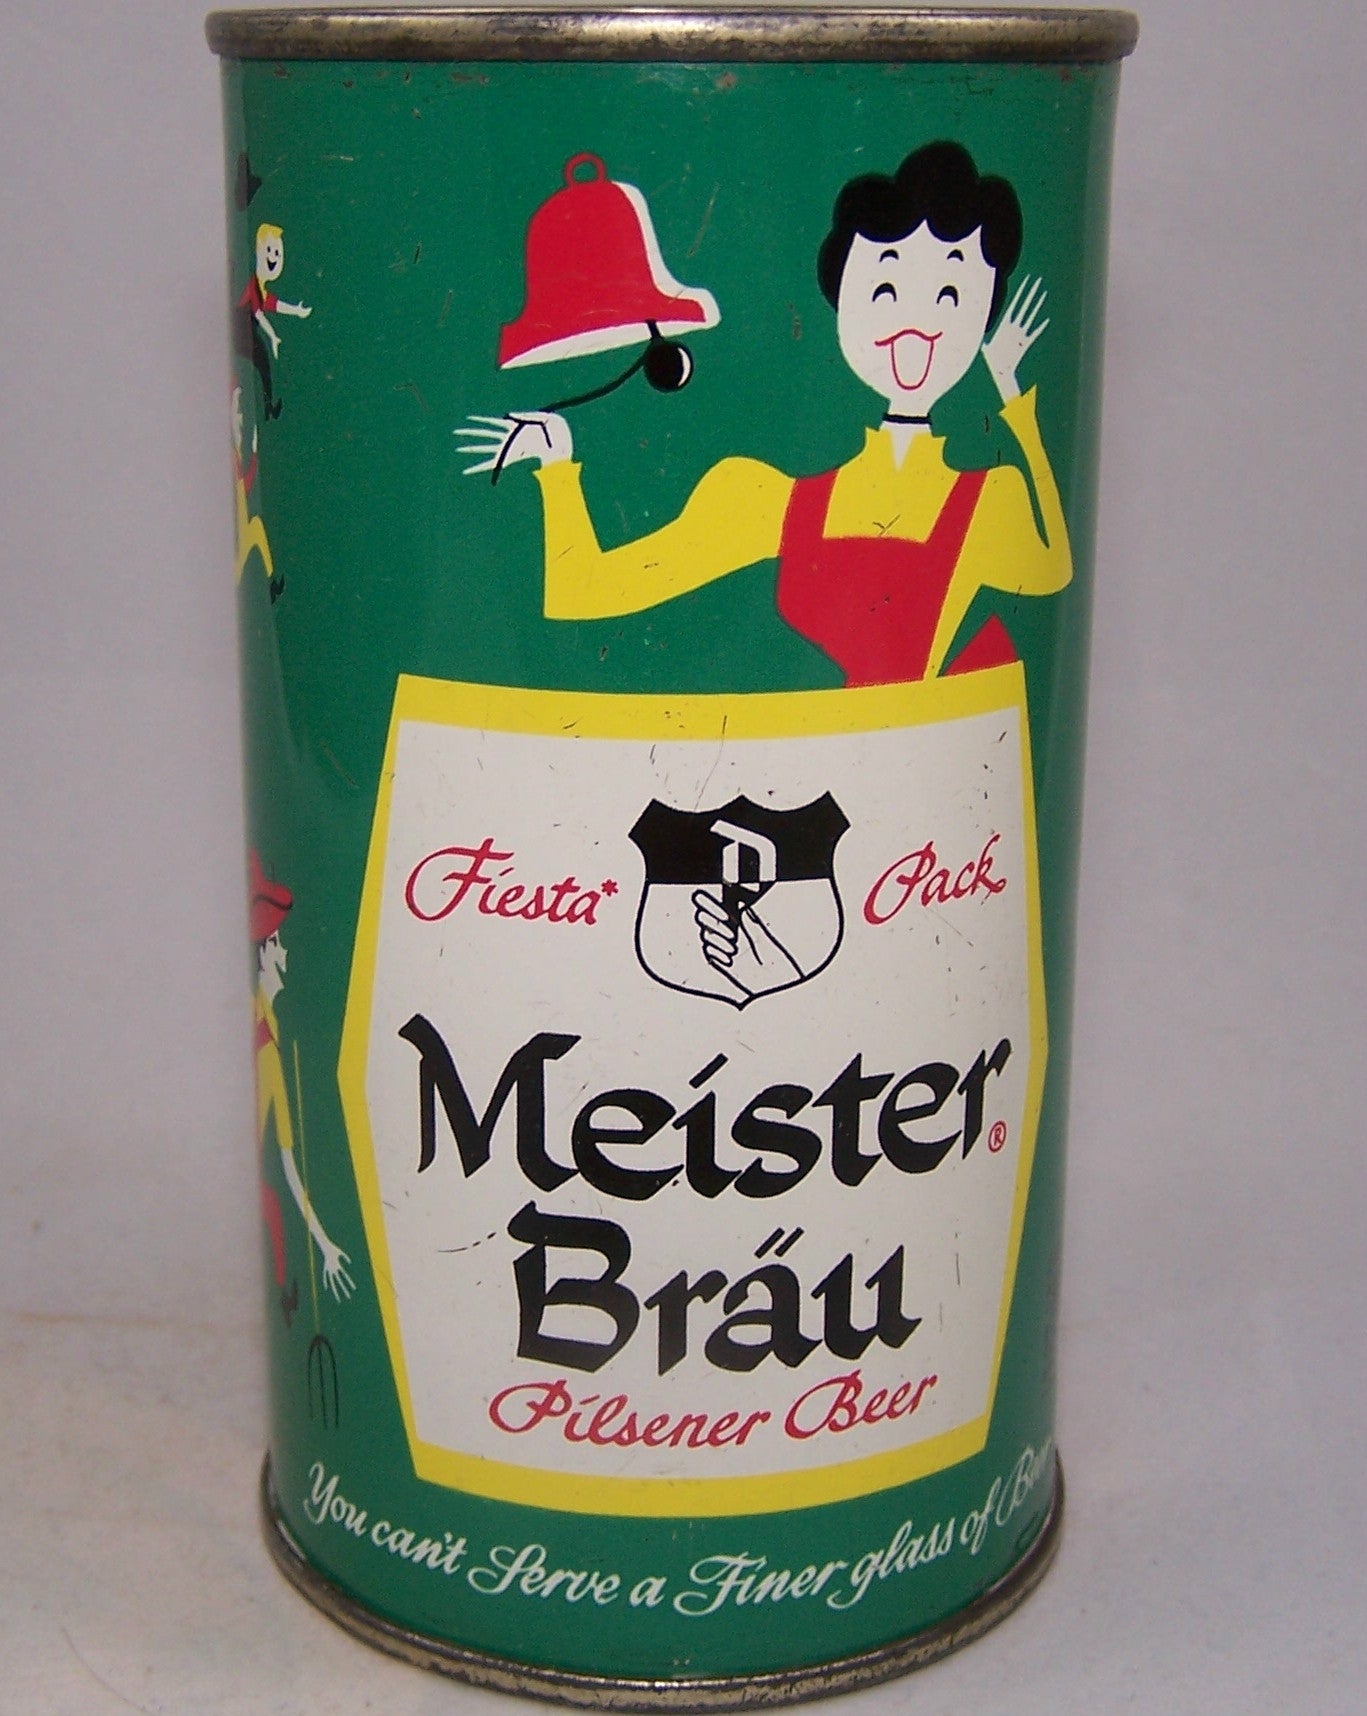 Meister Brau Beer (P In Hand) USBC 97-27, Grade 1 to 1/1+Sold 6/18/16